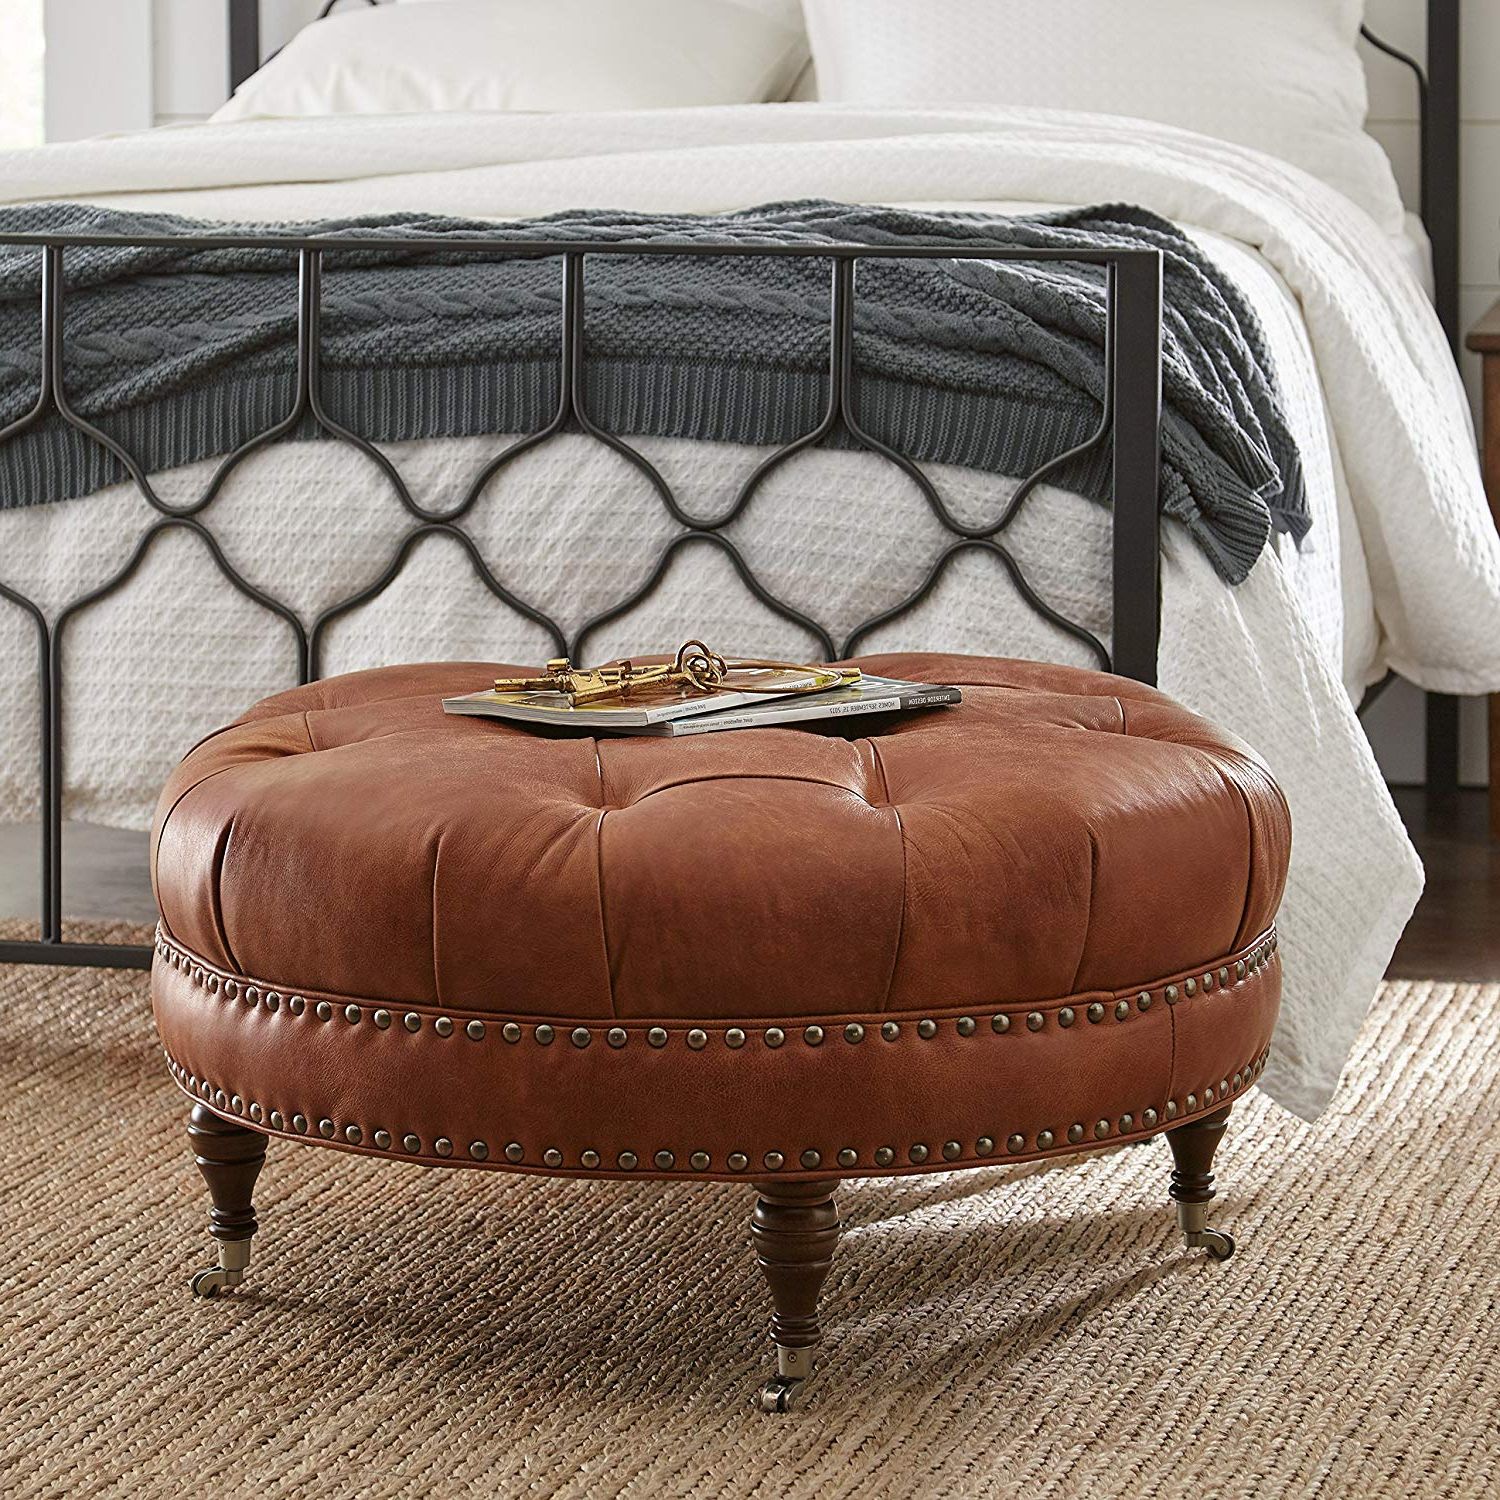 Leather Pouf Ottomans Within Famous Button Tufted Round Leather Wheeled Ottoman With Spindled Wooden Legs (View 7 of 10)